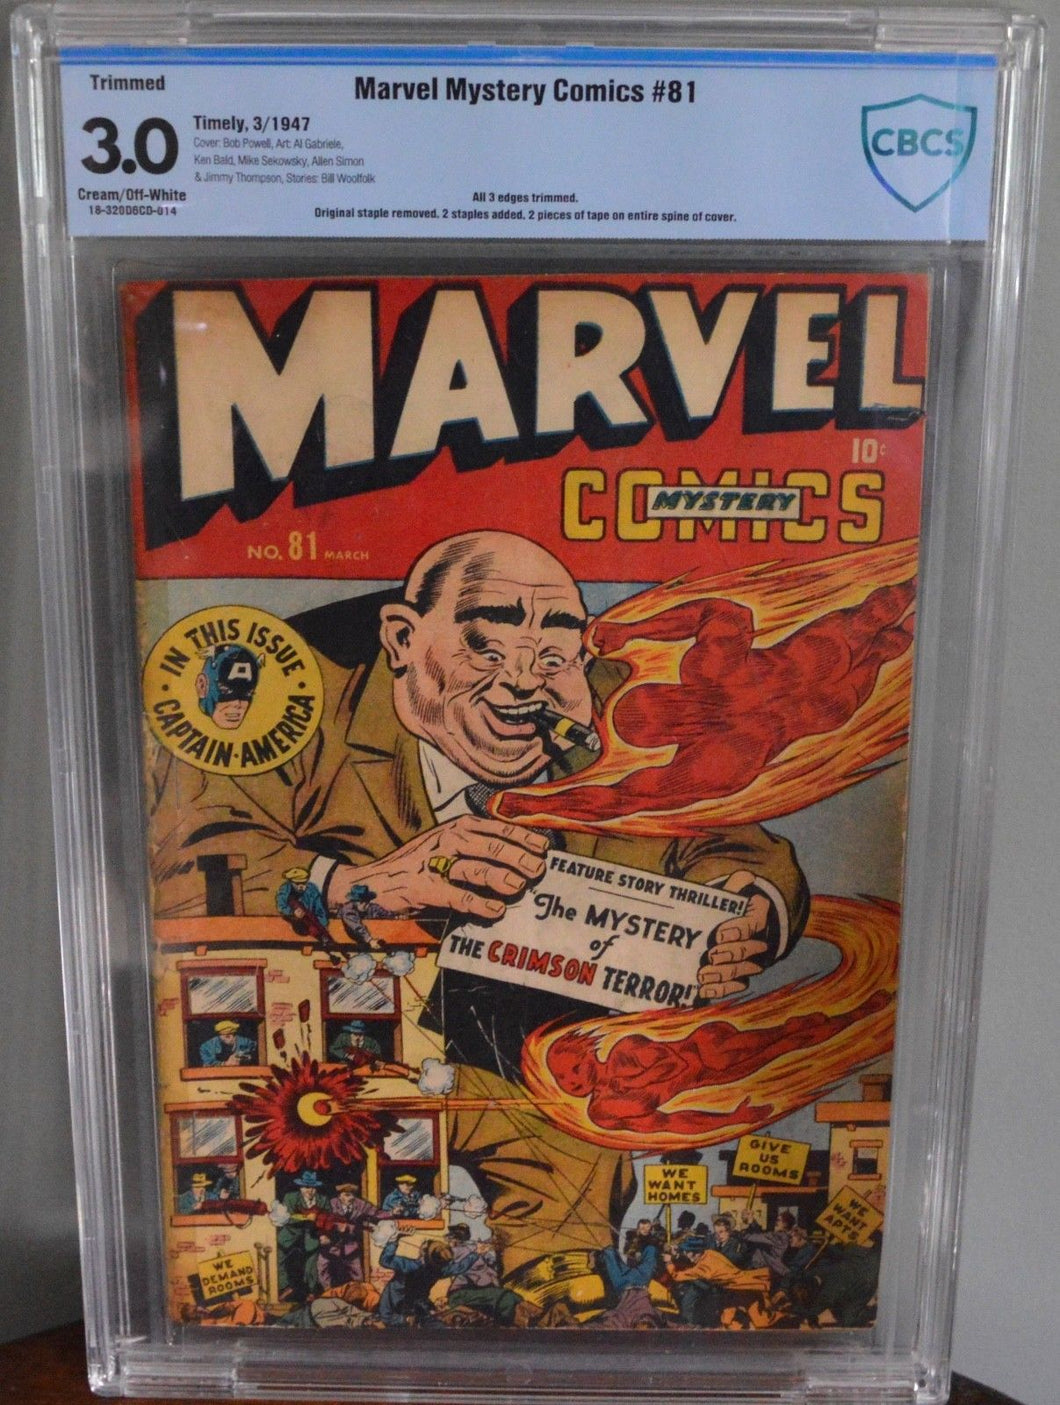 CBCS 3.0 MARVEL MYSTERY COMICS #81 (TIMELY, 1941) CAPTAIN AMERICA/HUMAN TORCH